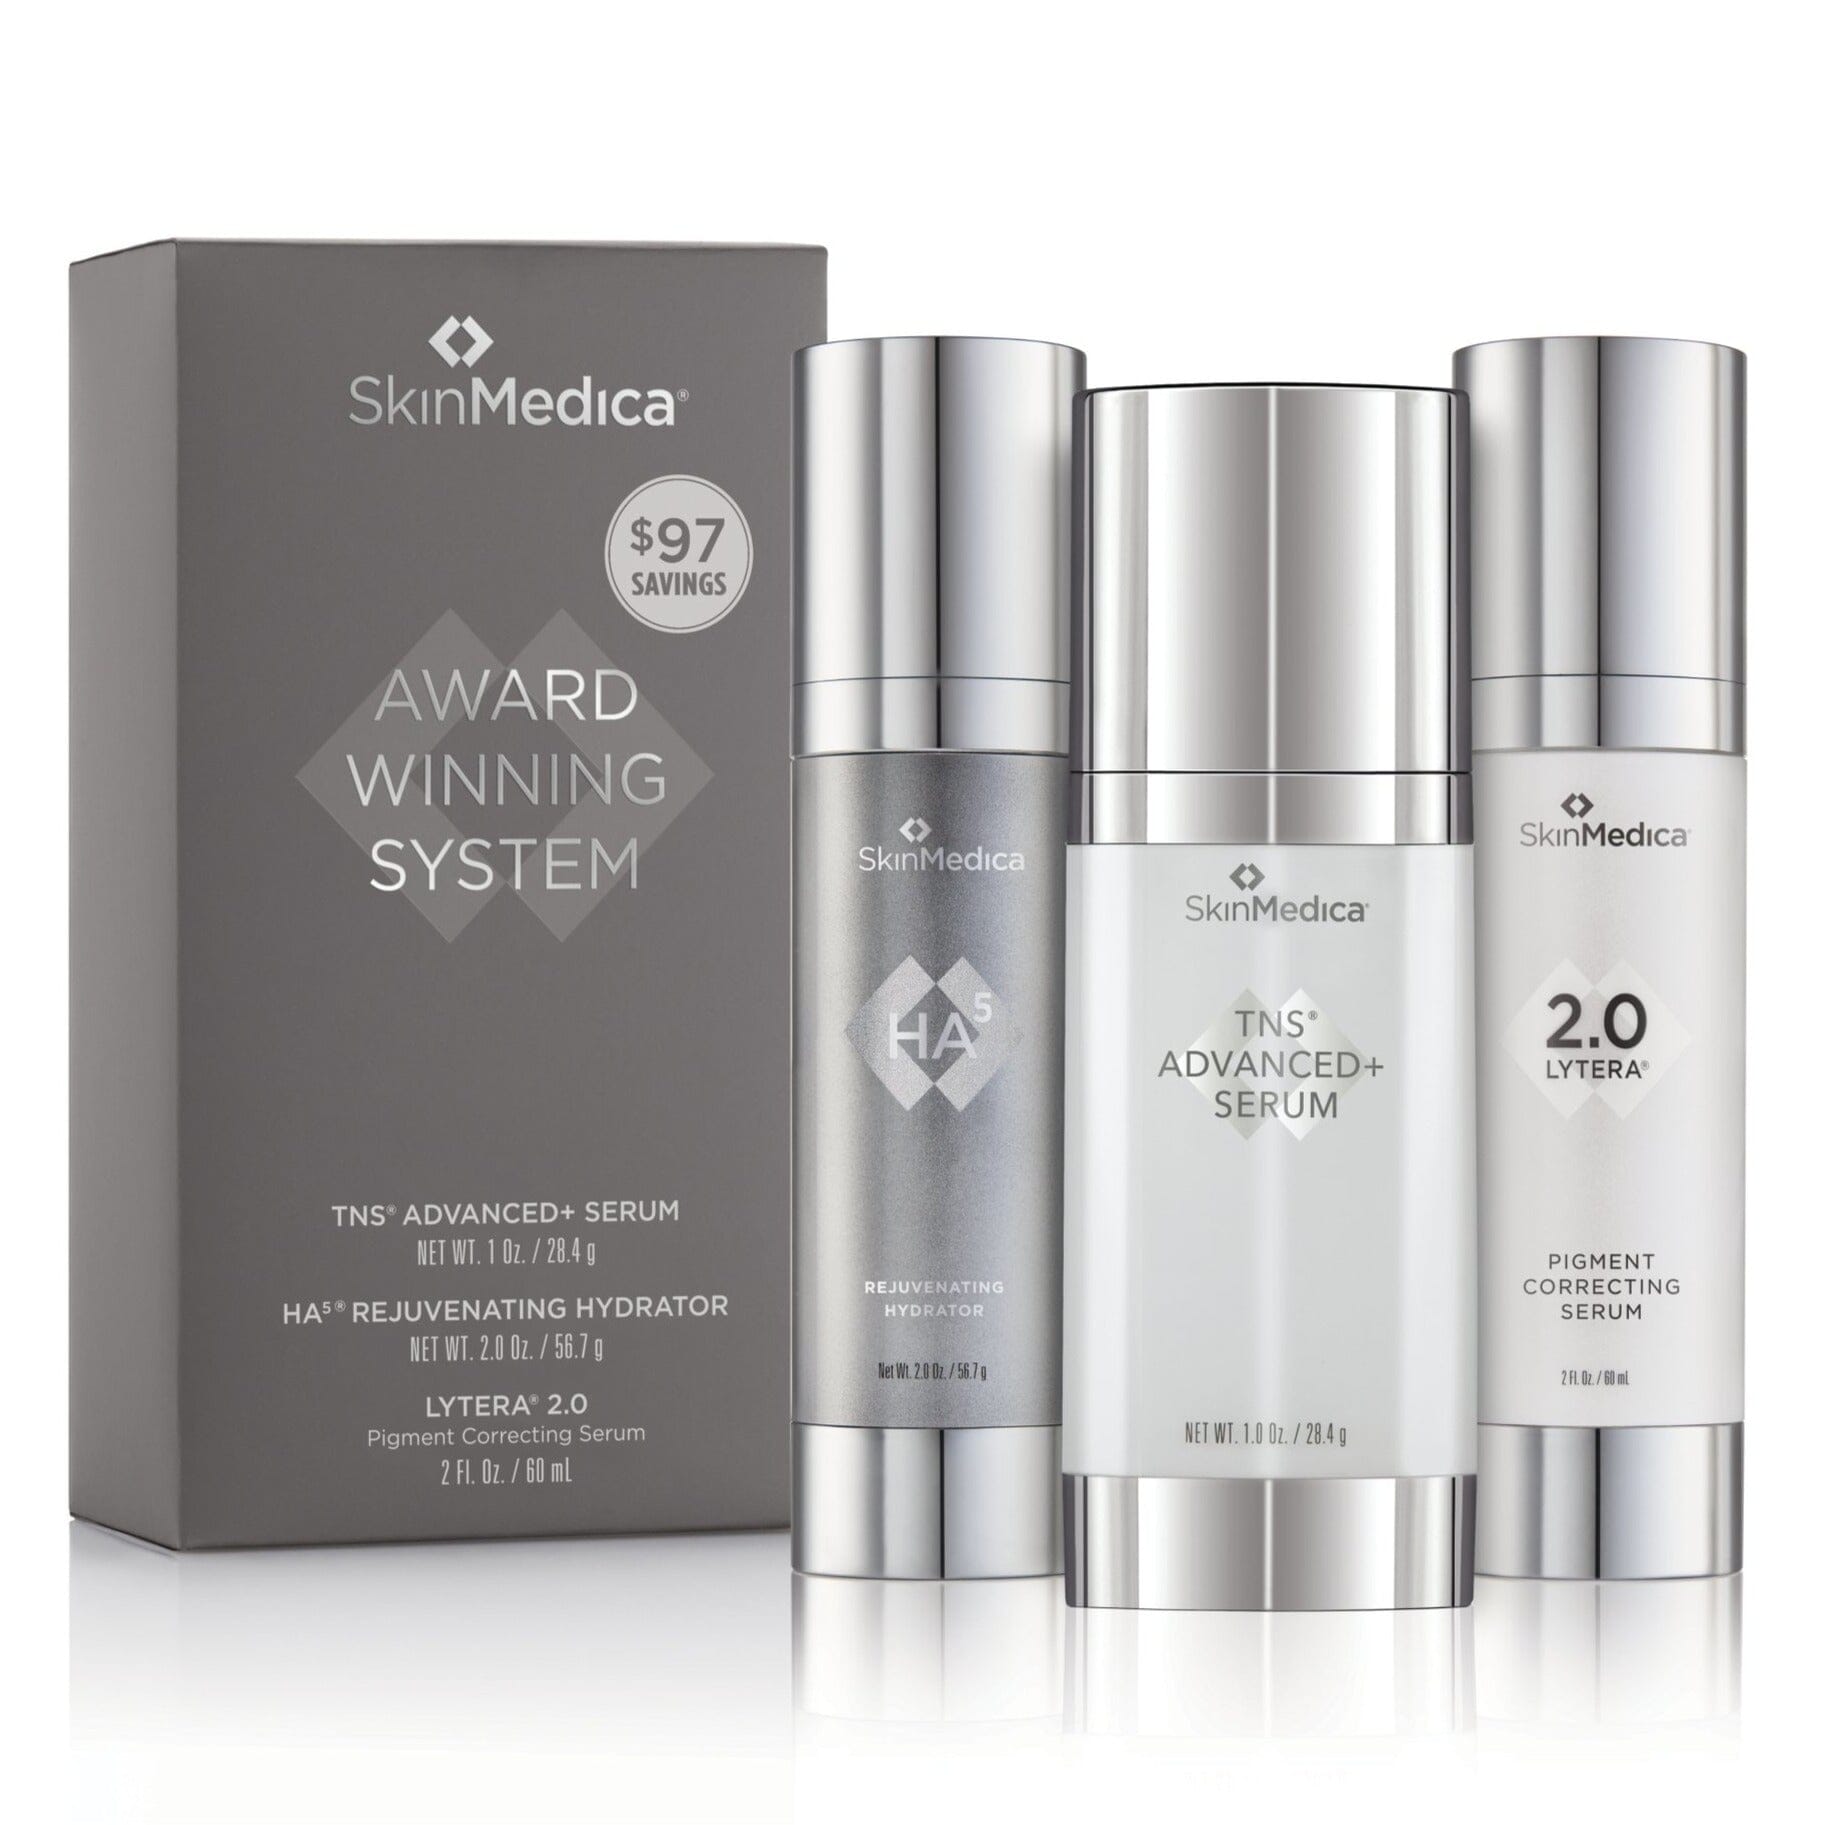 SkinMedica Award Winning System with TNS Advanced+ Serum SkinMedica Shop at Exclusive Beauty Club